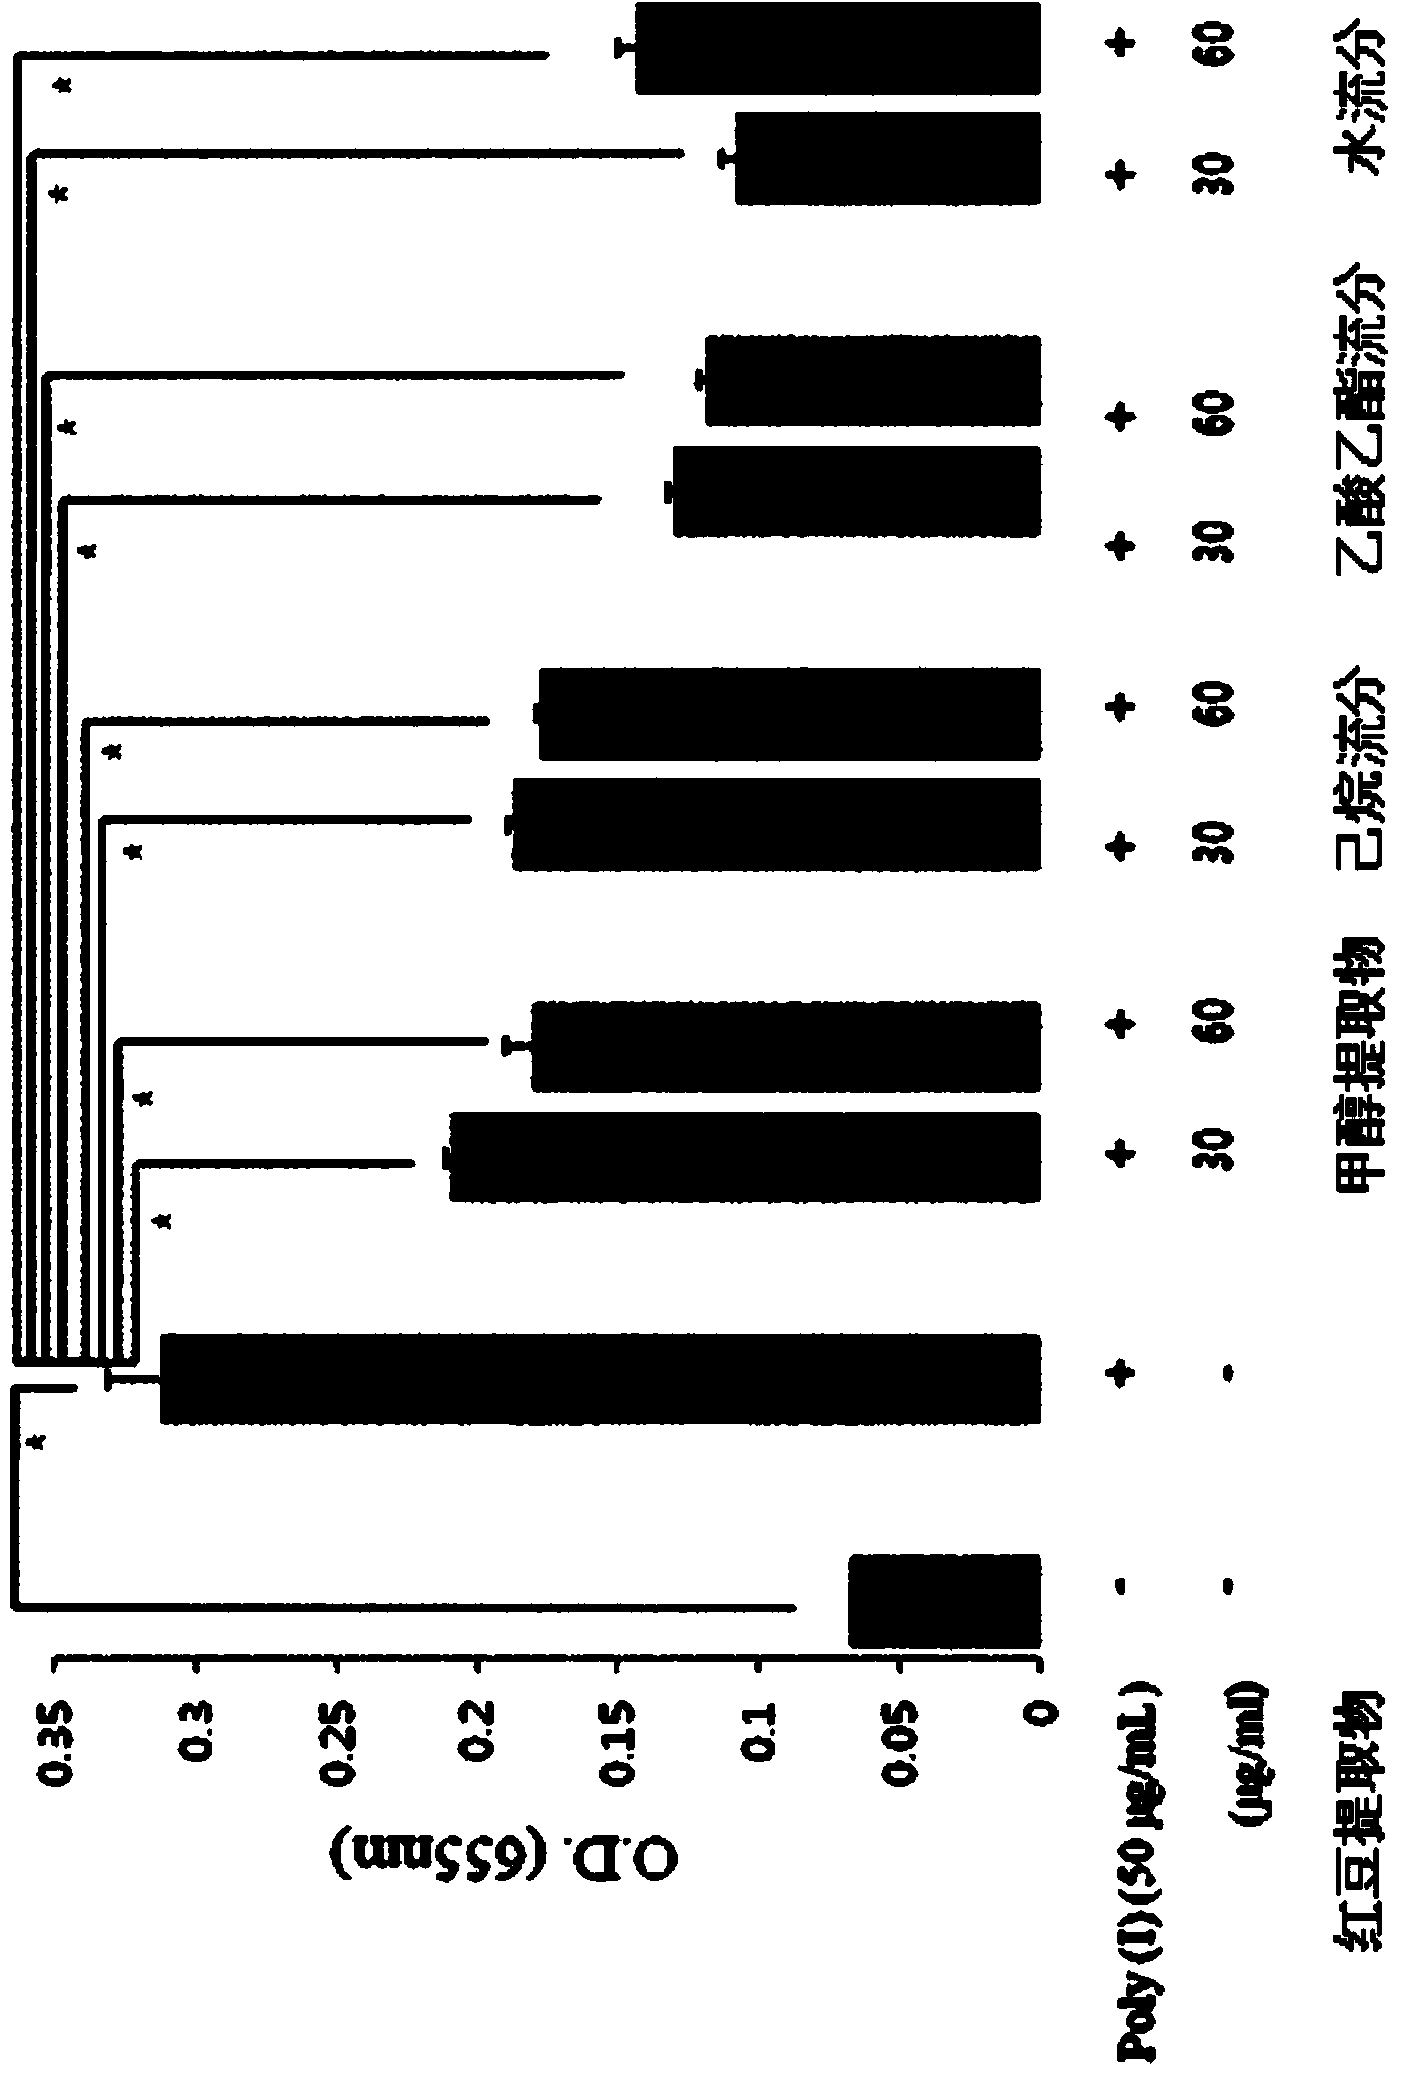 Pharmaceutical composition containing oleanolic acid acetate as an active ingredient for preventing or treating TLR- or IL-6-mediated diseases